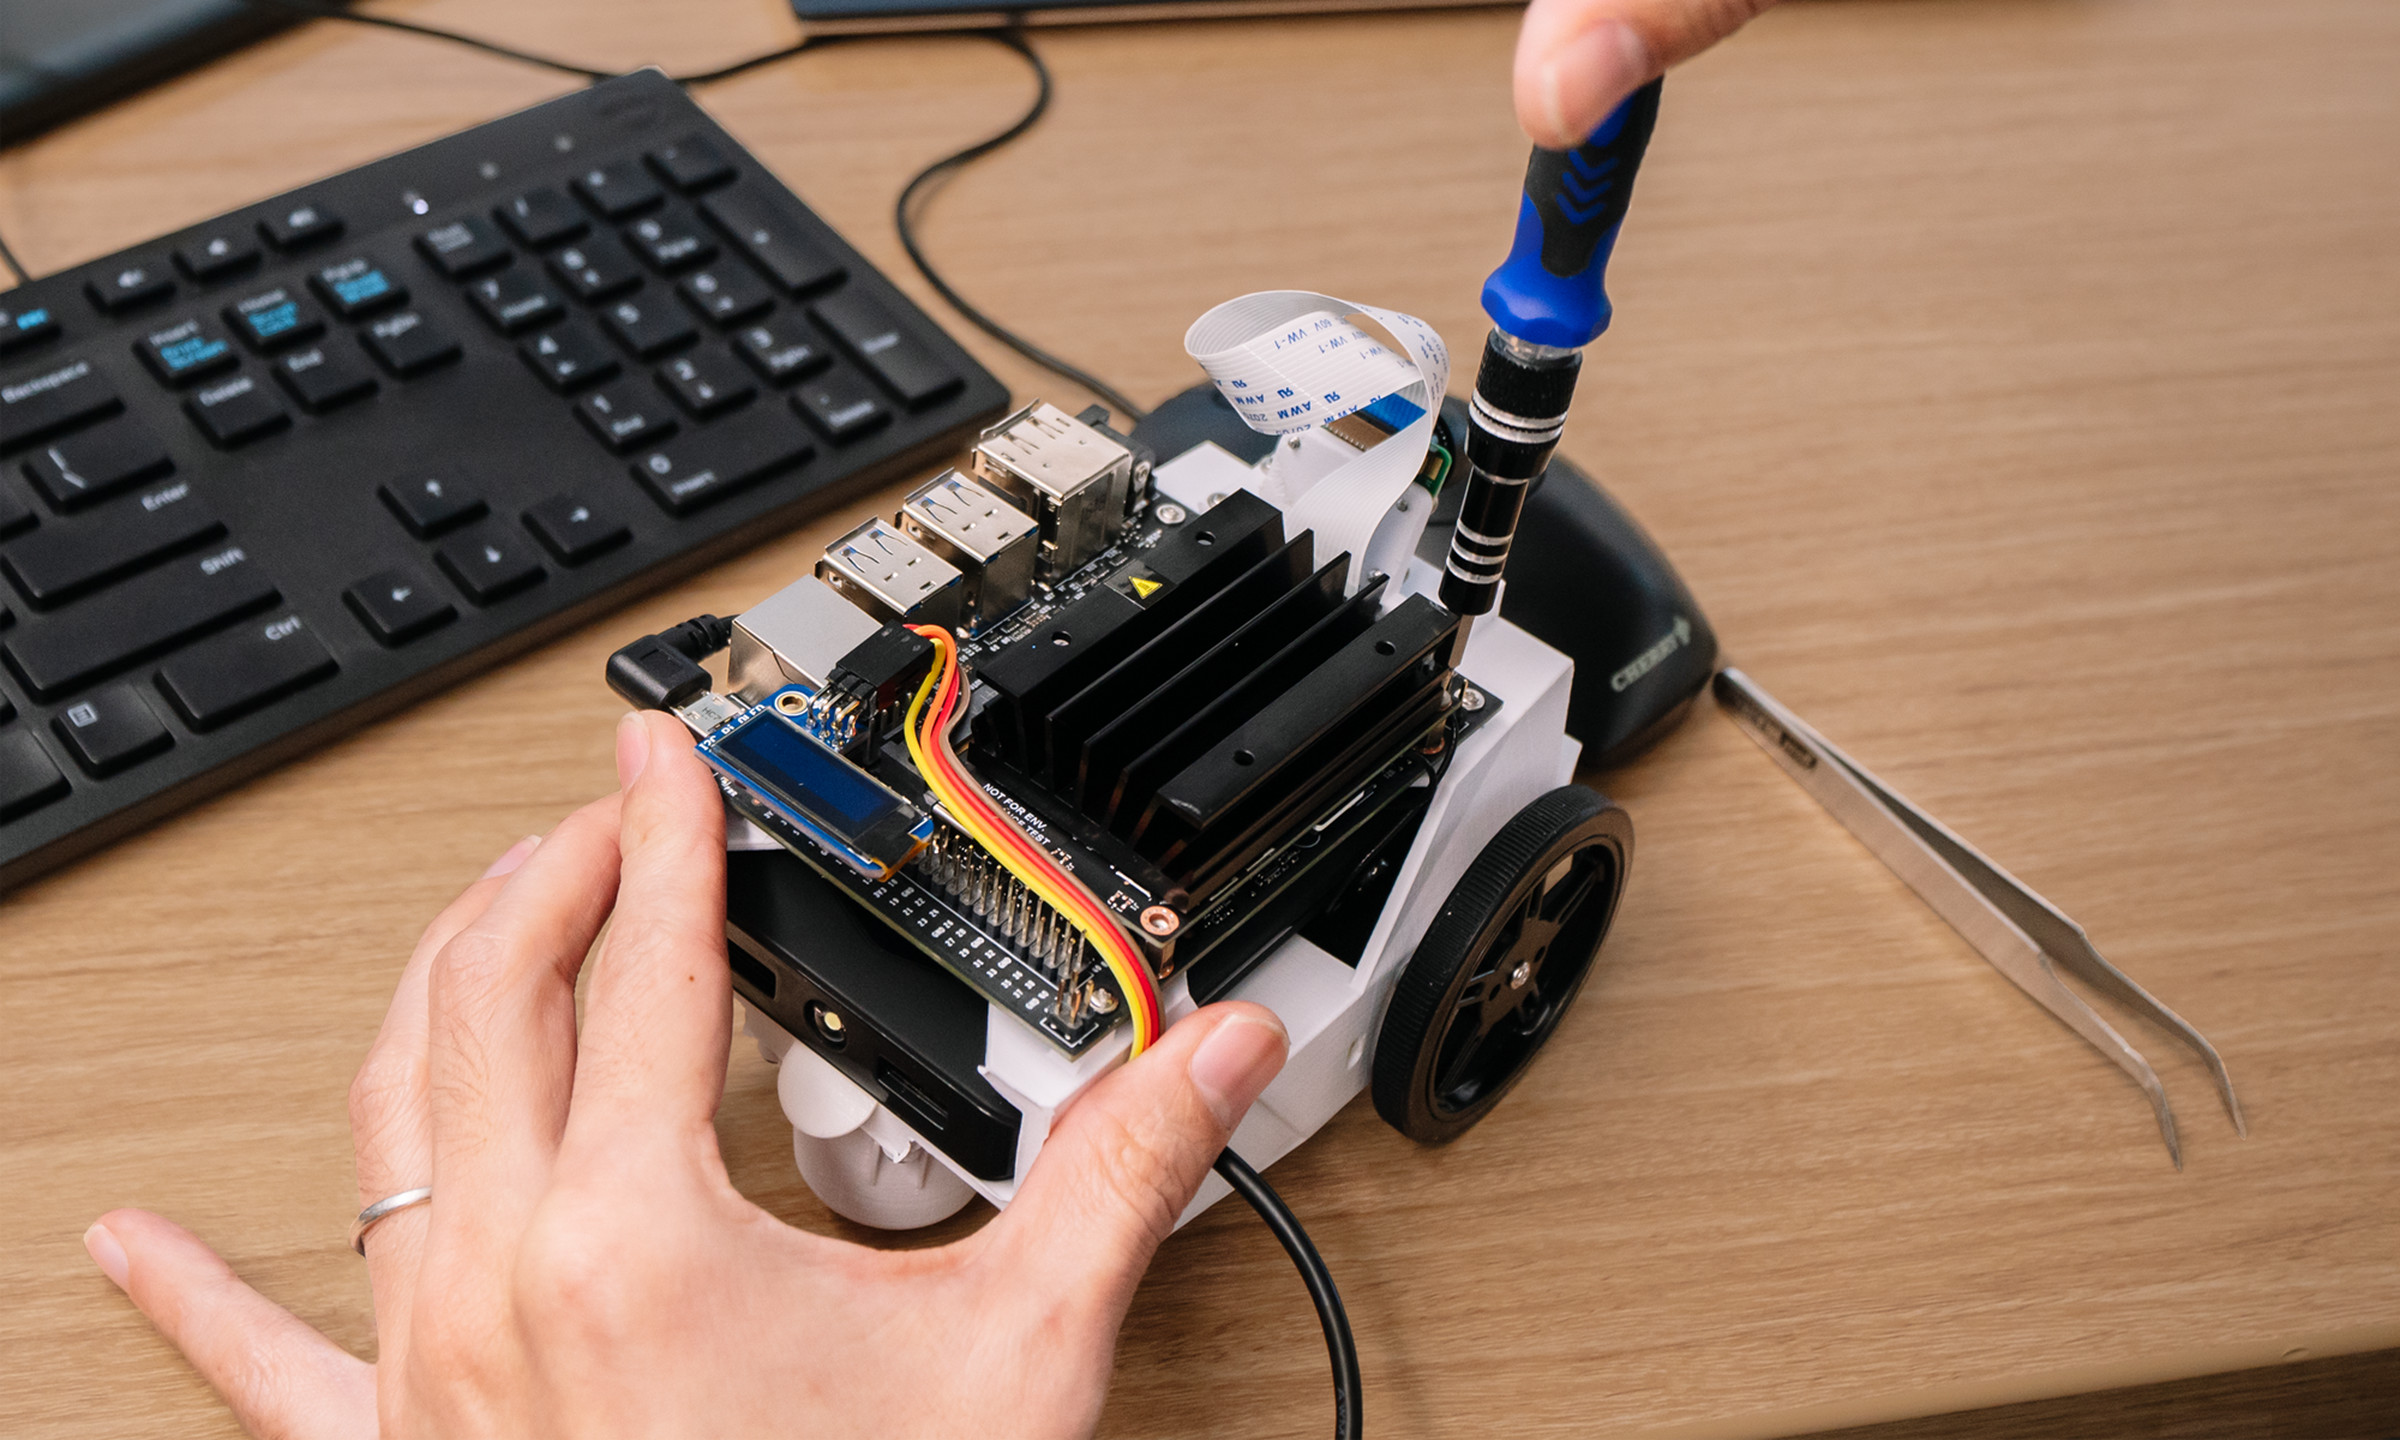 The Jetson Nano devkit being attached to Nvidia’s new open-source robotics kit, named JetBot.